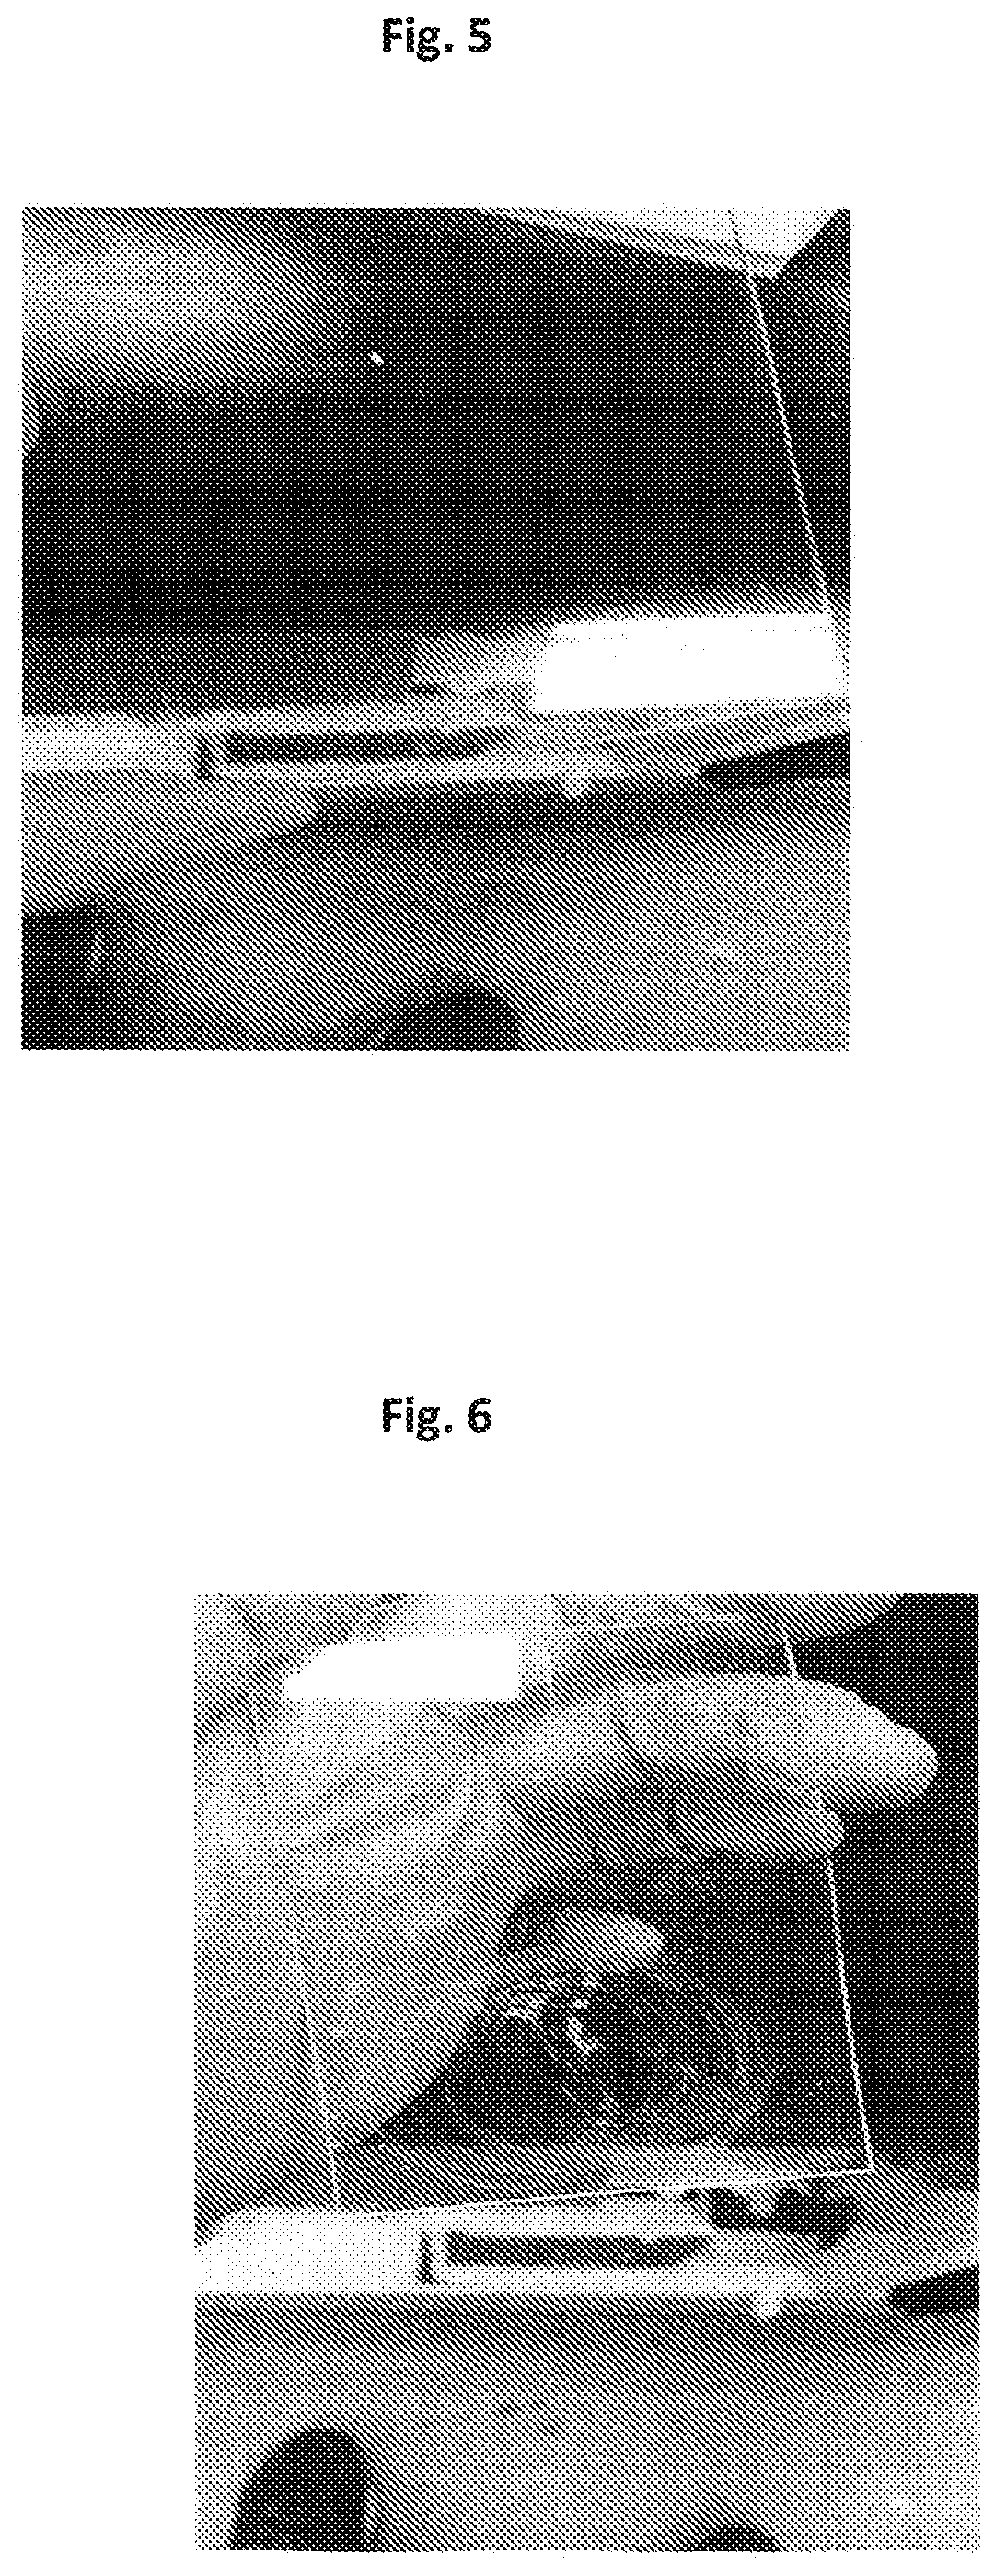 Headlight lens cleaning and restoring compositions and methods of use thereof